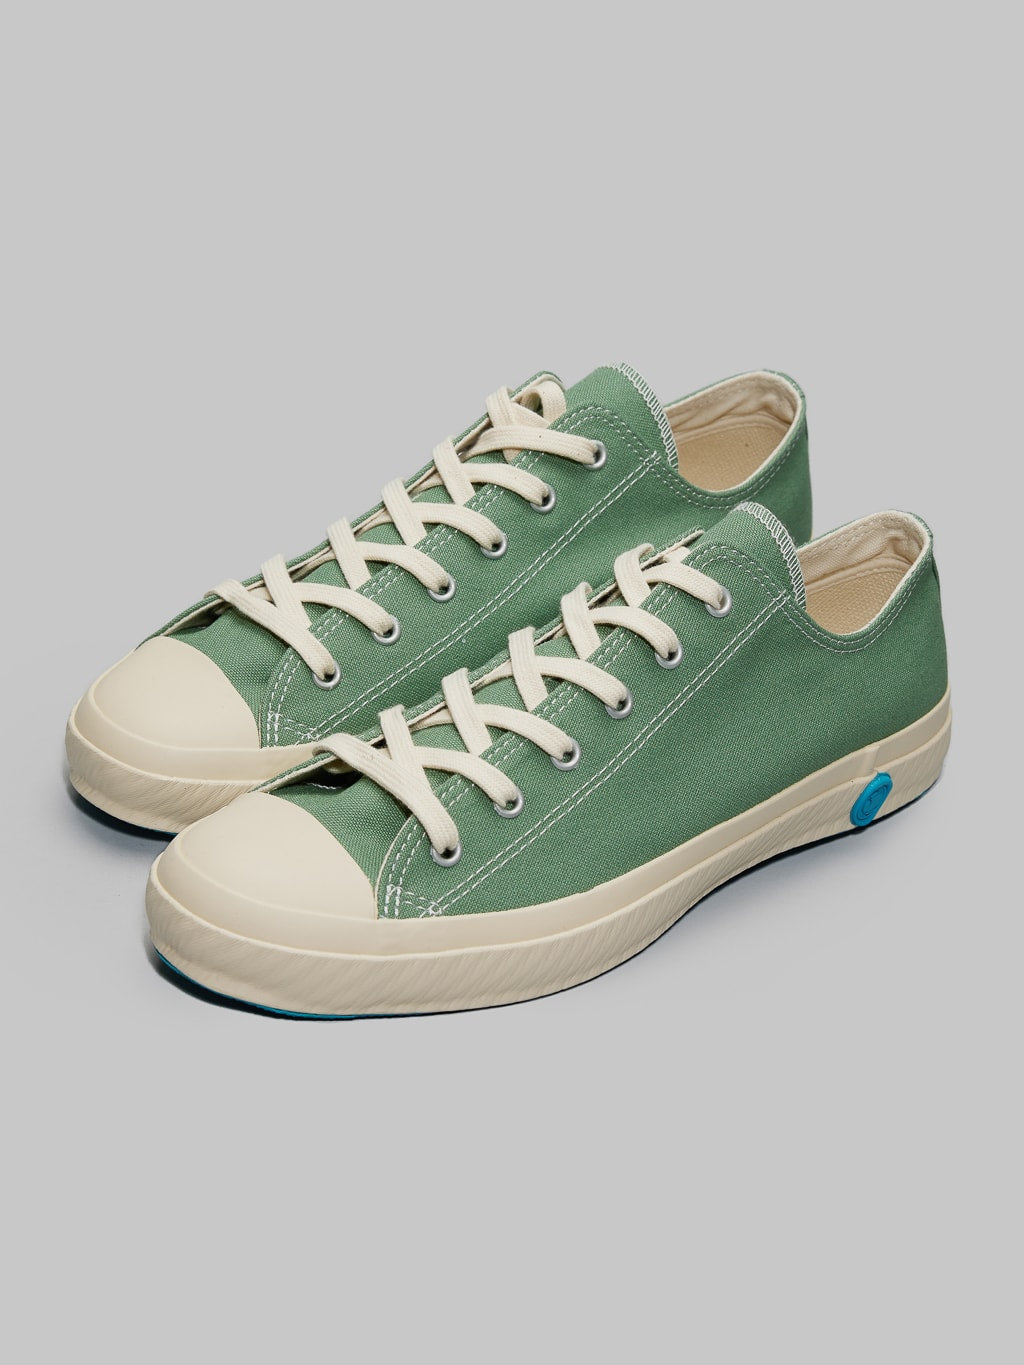 Shoes like pottery low sneaker green craftsmanship